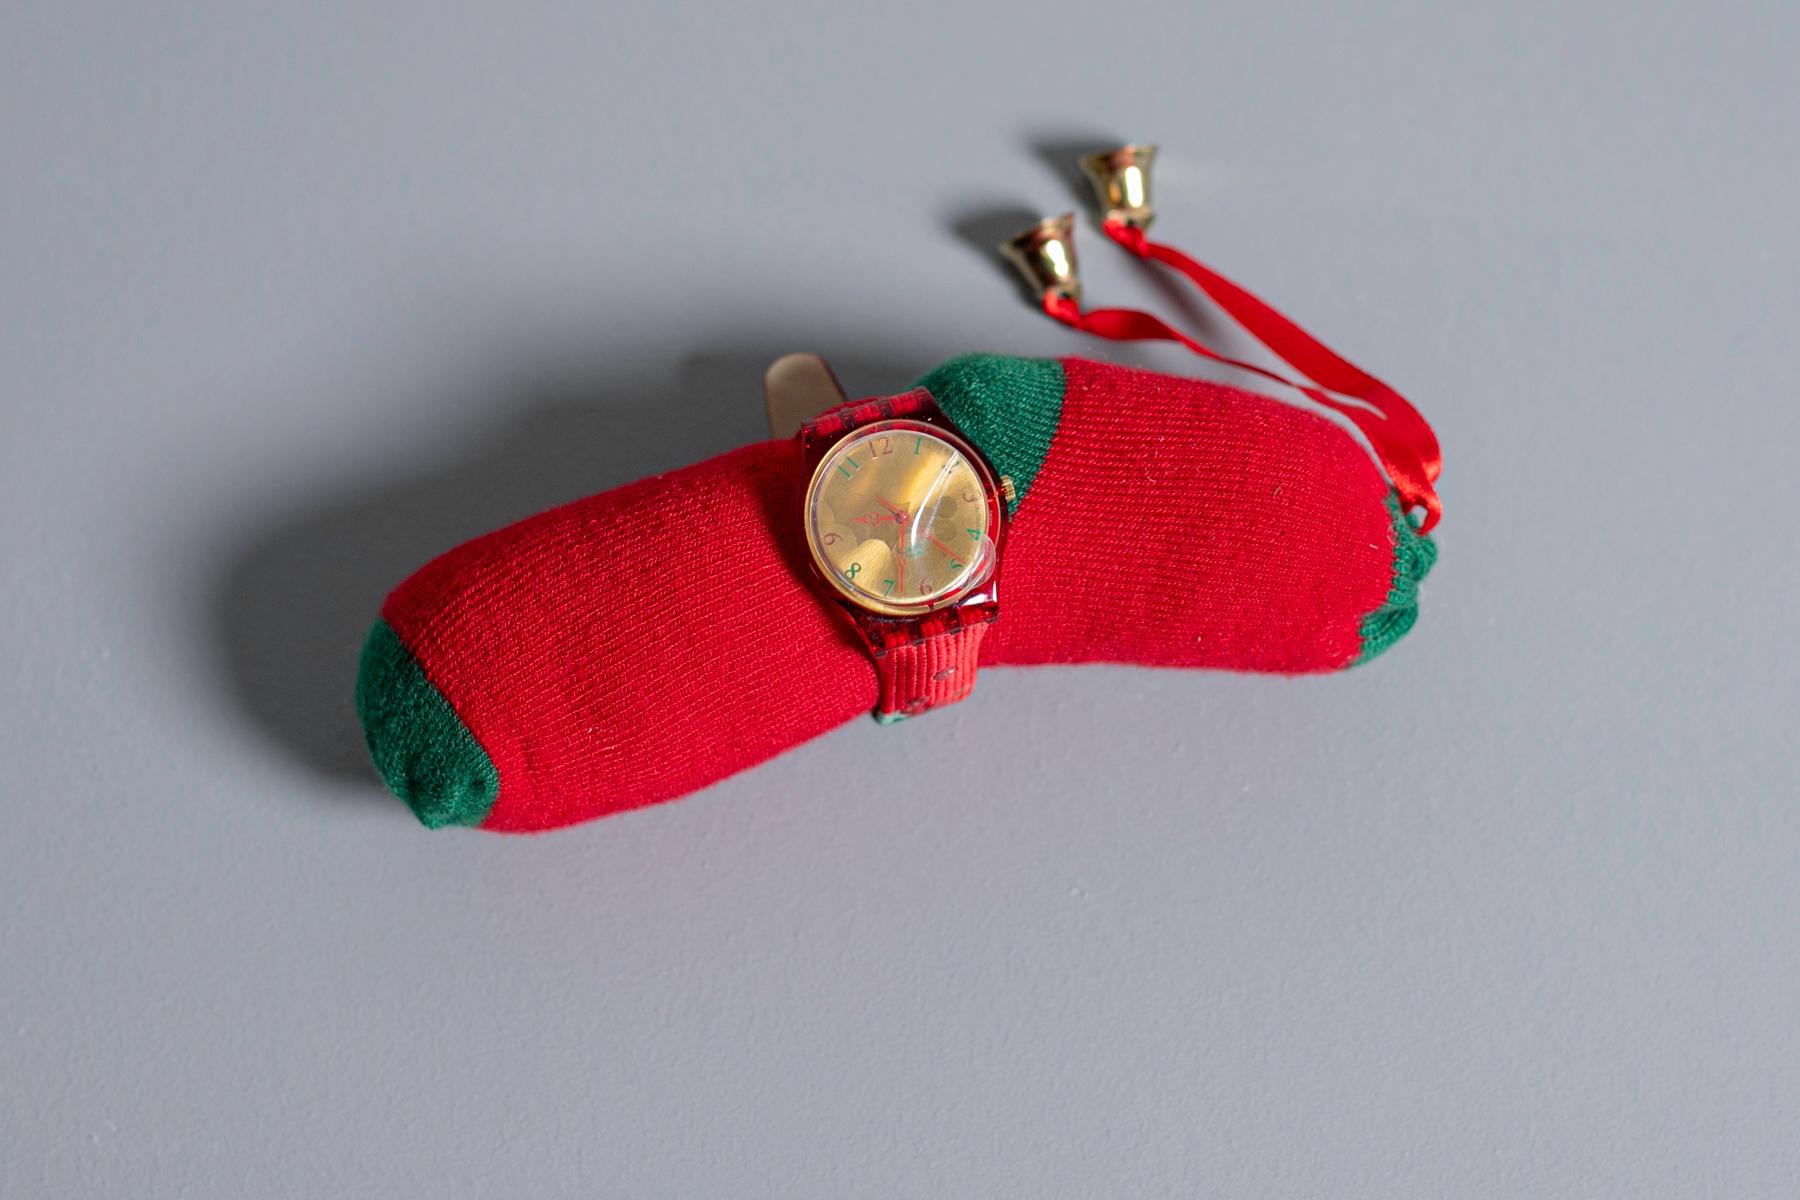 Beautiful Holly Jolly Swatch dedicated to Christmas holidays. The strap is made of leather and has a nice Christmas pattern. The box is made of wood and inside the clock is rolled up to a cute sock. 

Case material: Plastic
Strap Material: